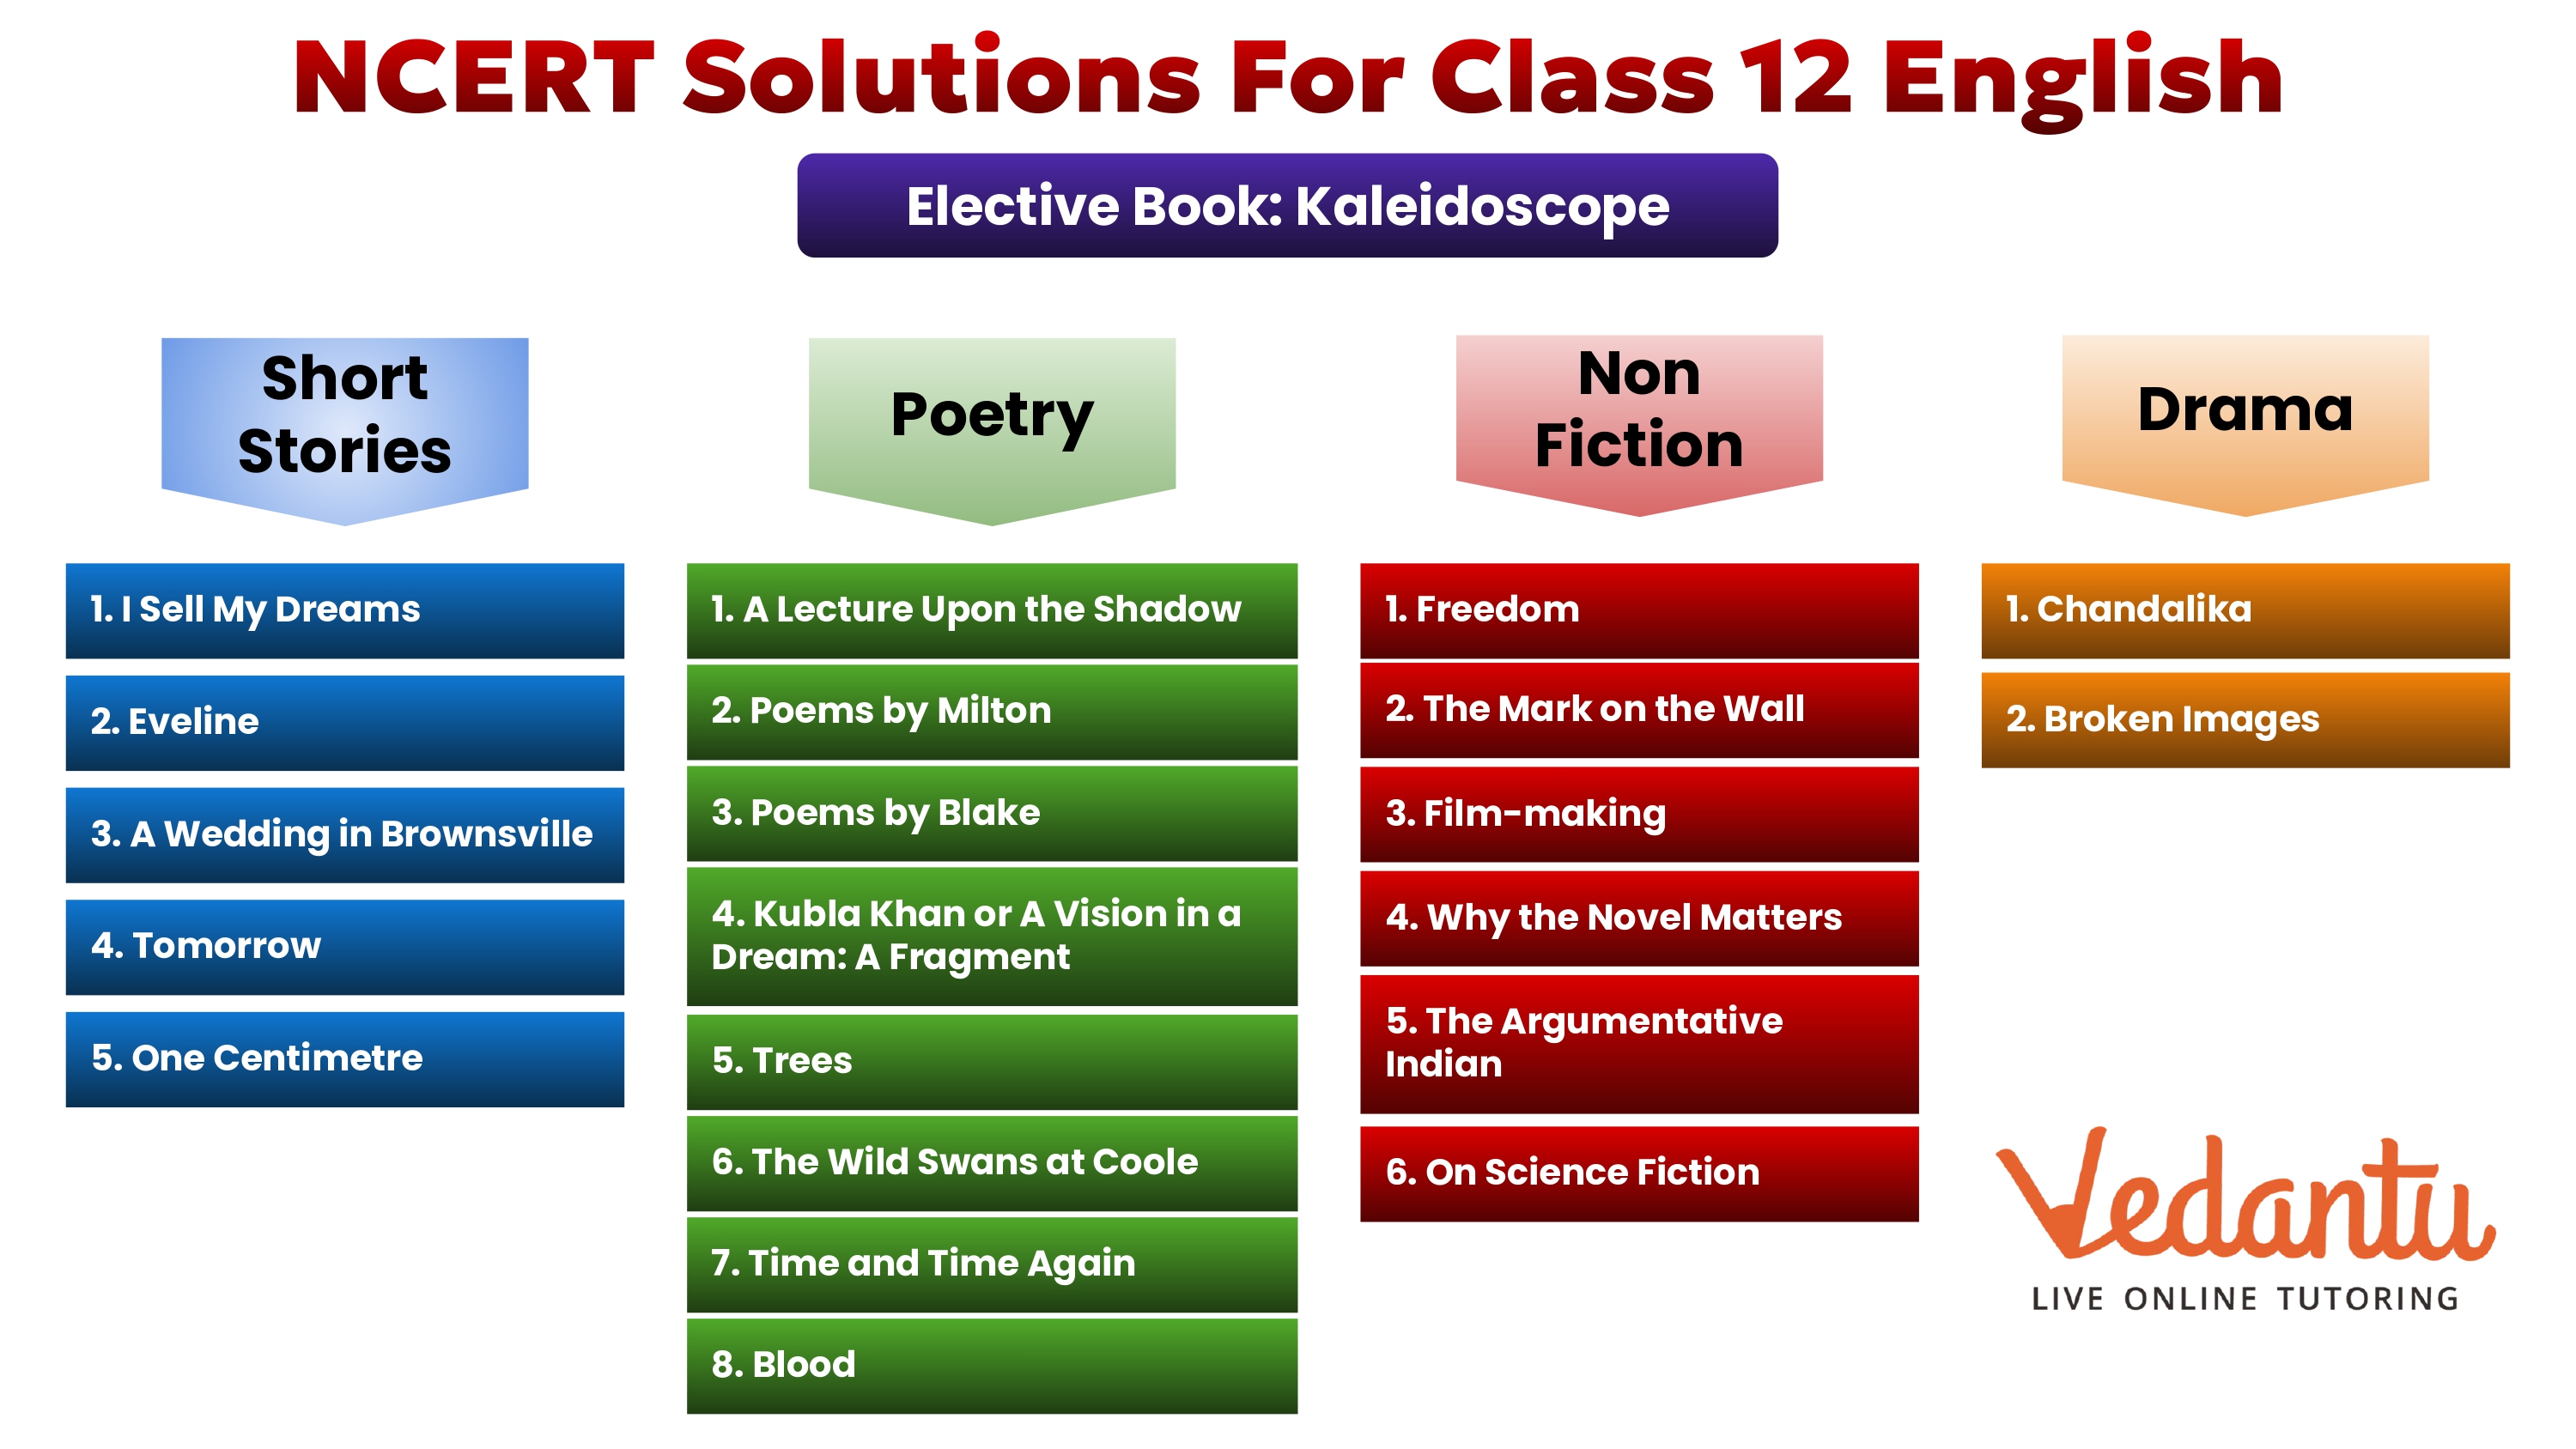 NCERT Solutions for Class 12 English Kaleidoscope Chapter-wise List